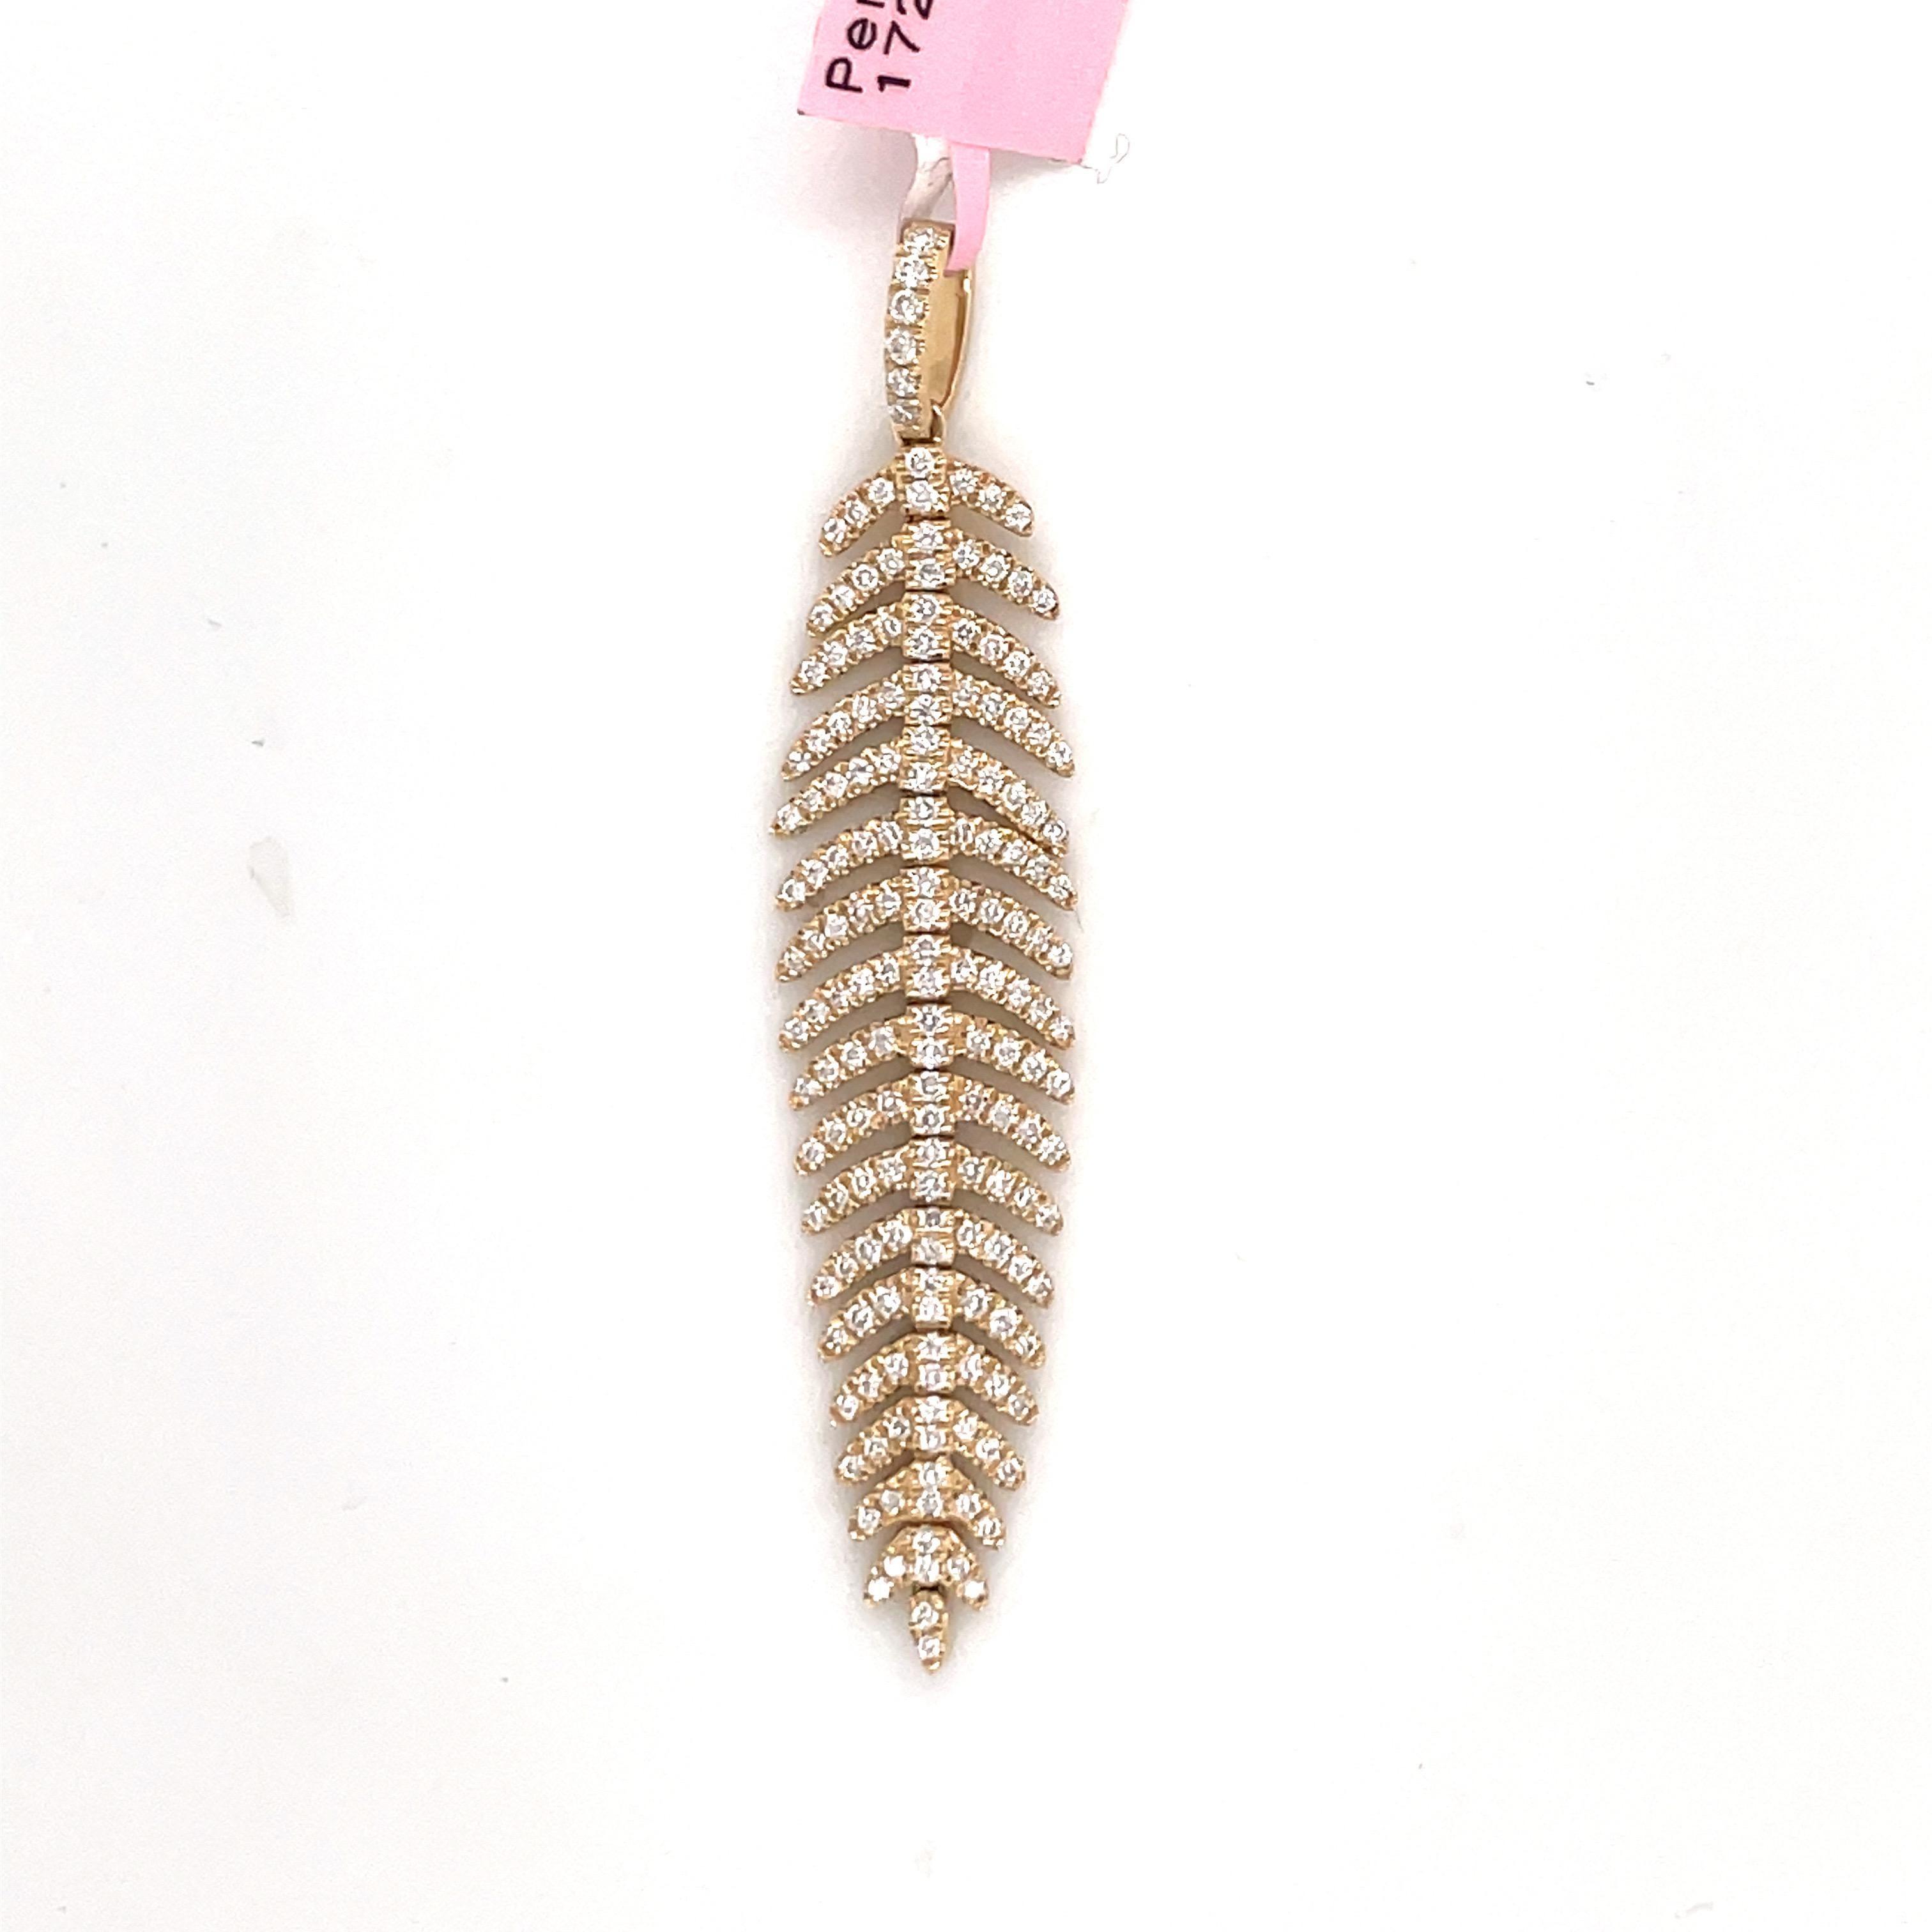 14 Karat Yellow Gold flexible feather pendant featuring 172 round brilliants weighing 0.58 carats. 
Color G-H
Clarity SI

Chain & enhancer not included. DM if you would like to purchase one.